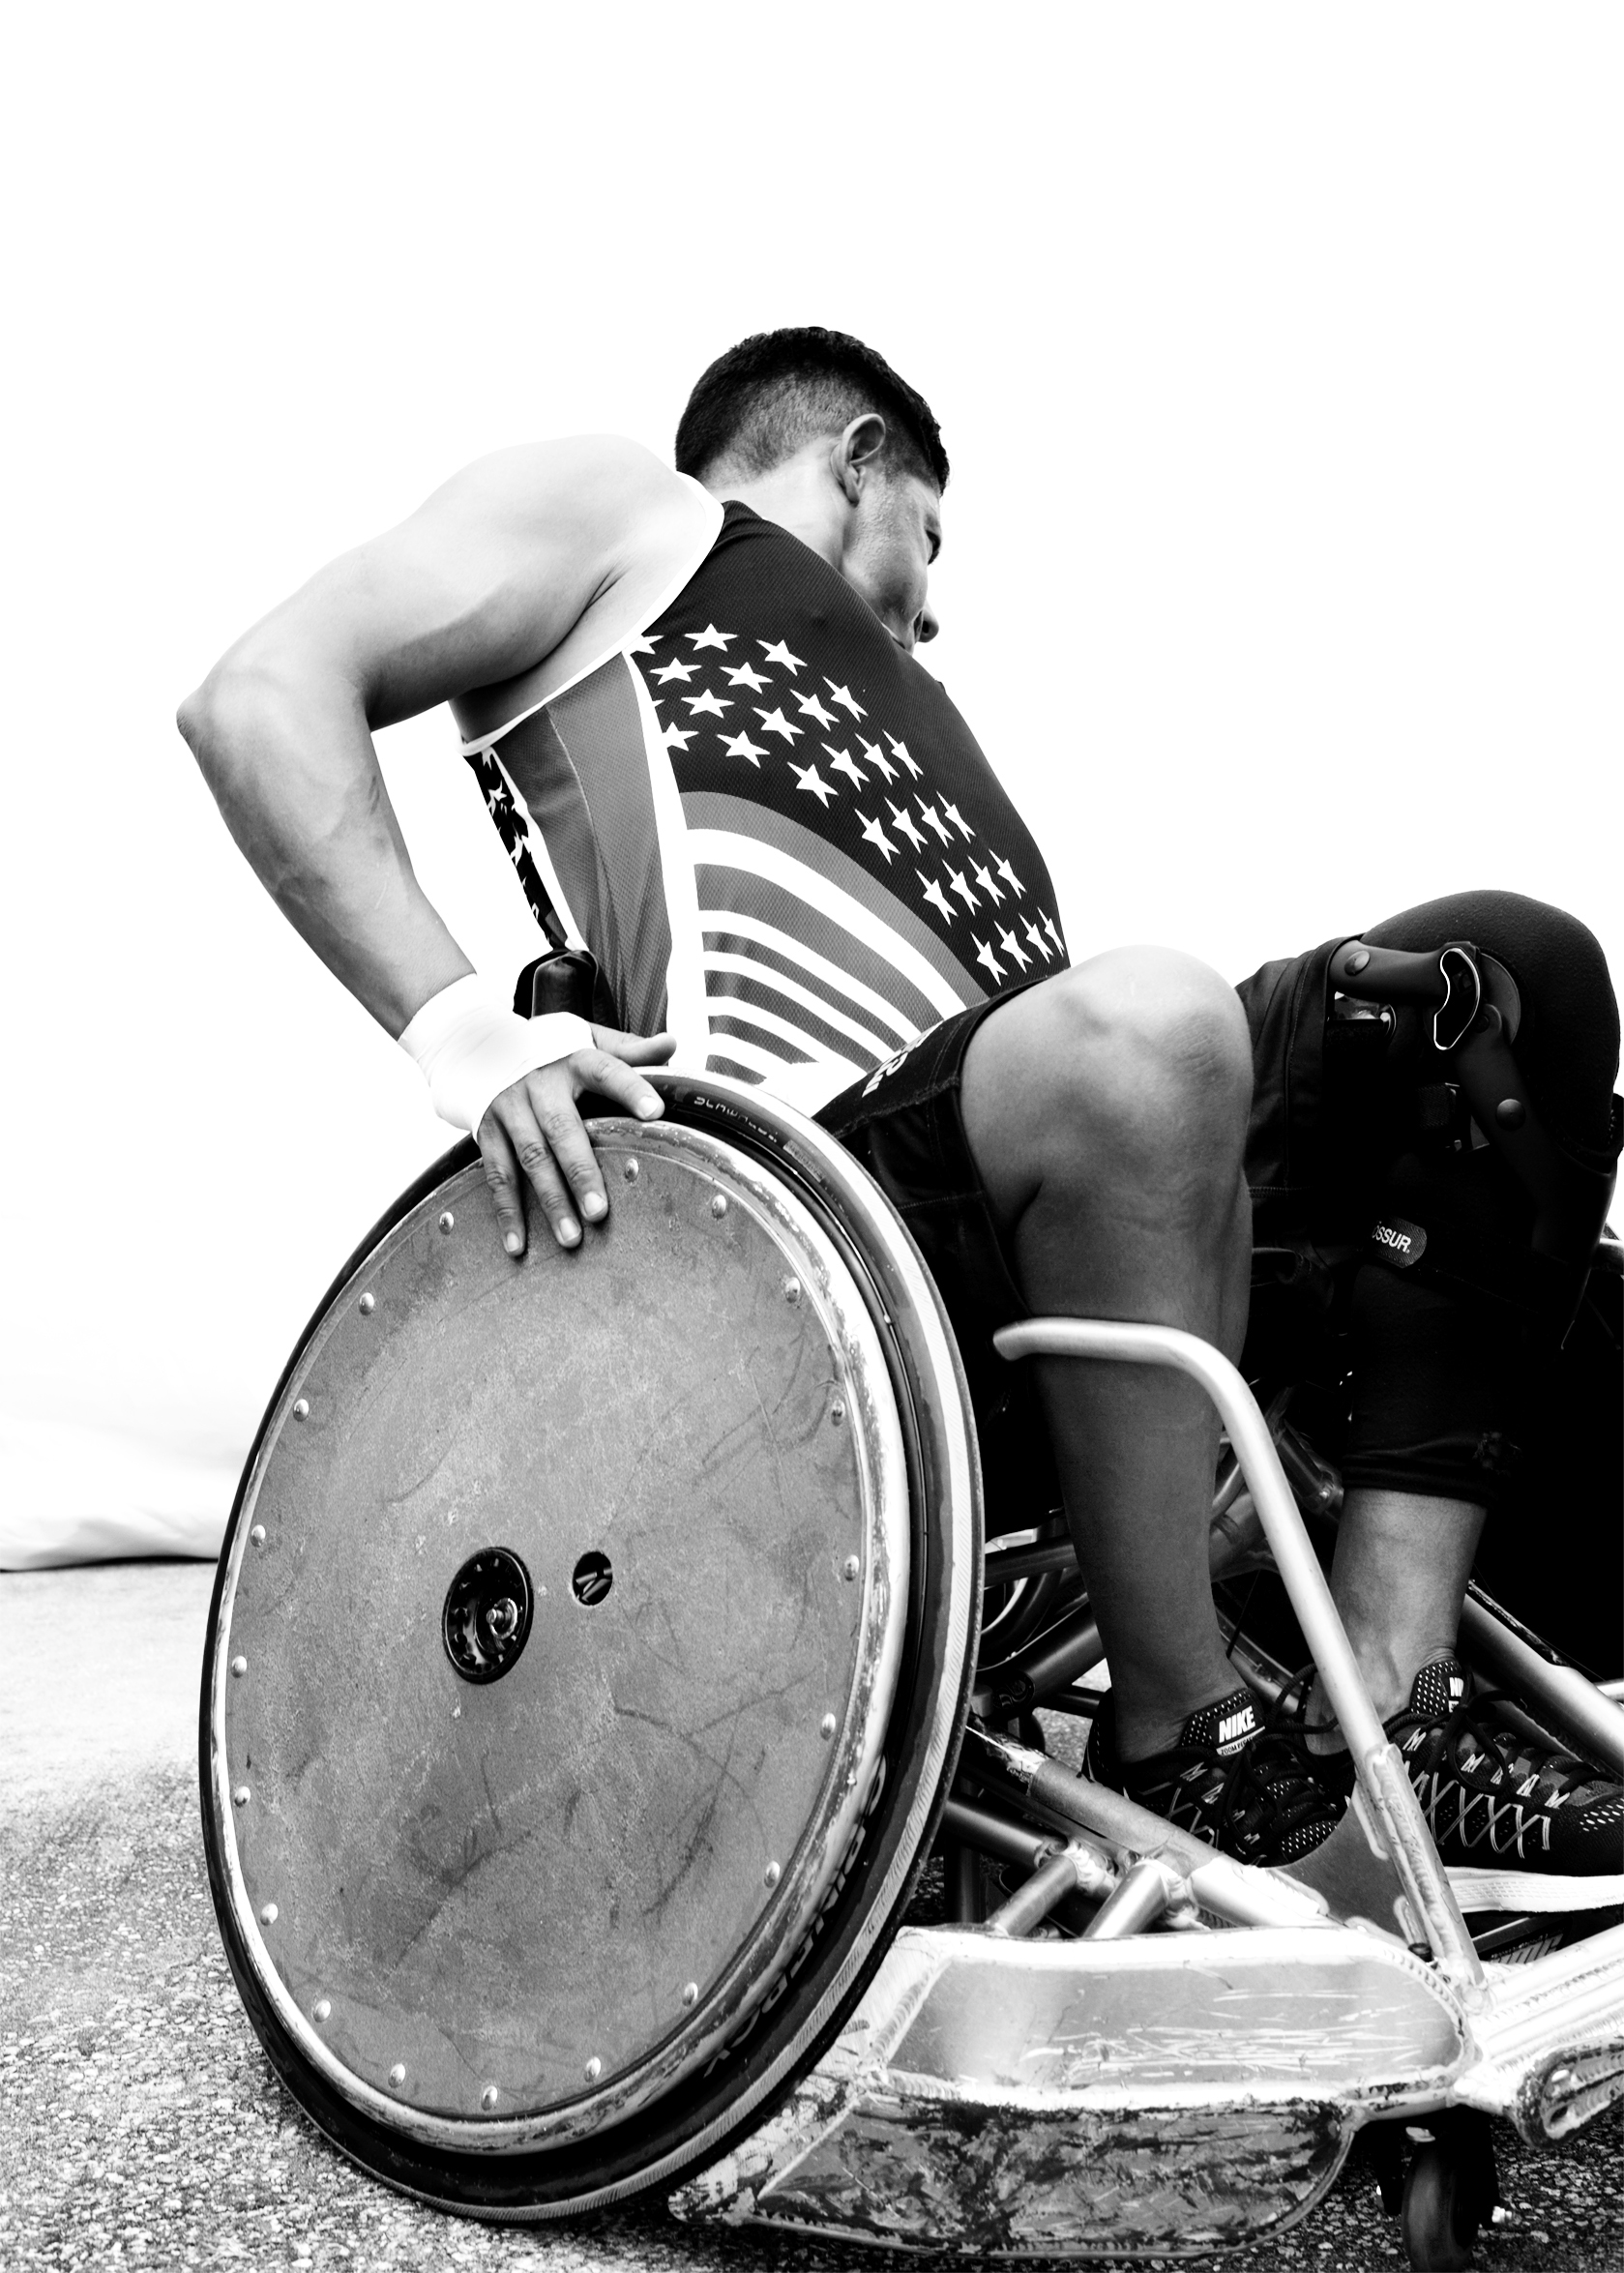 Anthony Rios, USA, competed in cycling, sitting volleyball and wheelchair rugby